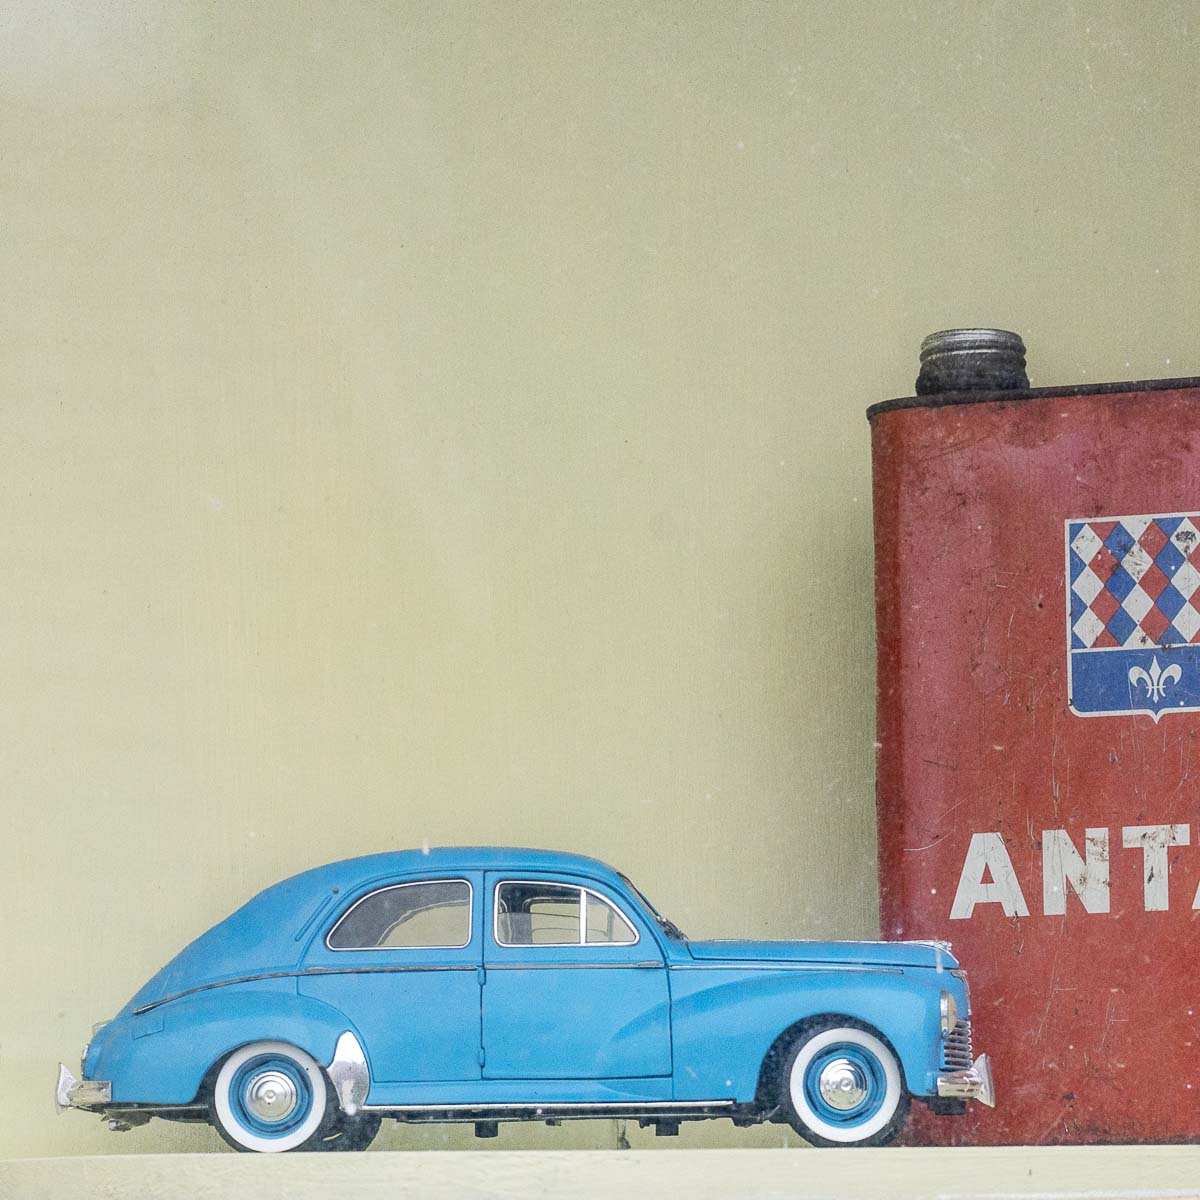 Detail in a showcase of a former garage car mechanics miniature car old collection oil can of Brand Antar in Ouzouer-le-Doyen